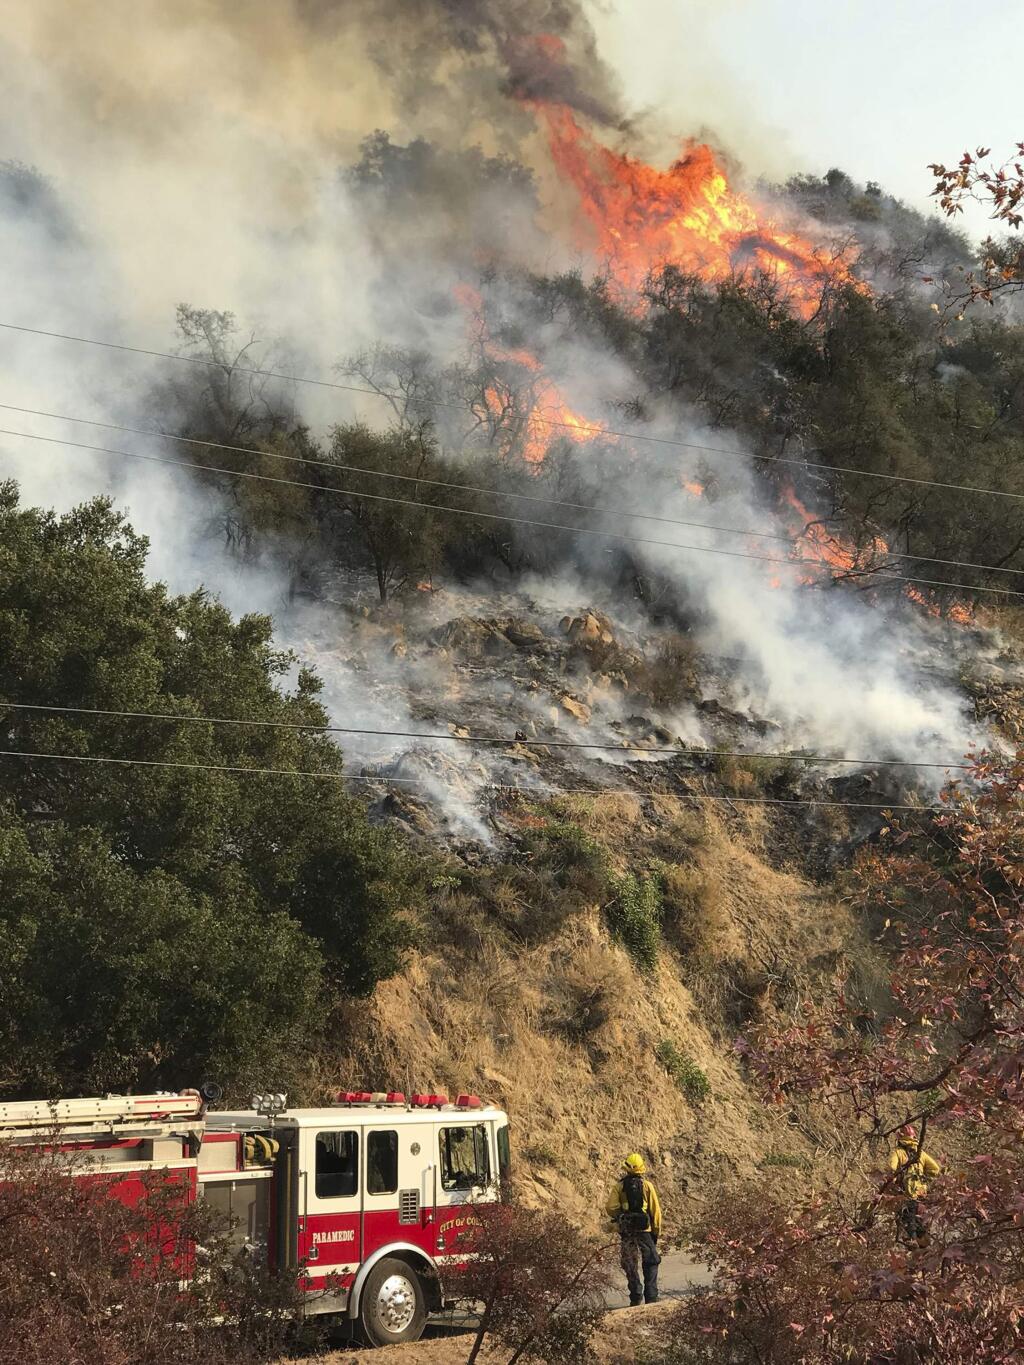 In this photo provided by the Santa Barbara County Fire Department, an engine company from the city of Colton, Calif., operating under mutual aid, keeps watch on pockets of burning and unburned vegetation off Bella Vista Dr. in Montecito, Calif., Wednesday, Dec. 13, 2017. After announcing increased containment on the Thomas fire, one of the biggest wildfires in California history, officials Wednesday warned that communities remain at risk and the threat could increase as unpredictable winds whip up again. (Mike Eliason/Santa Barbara County Fire Department via AP)